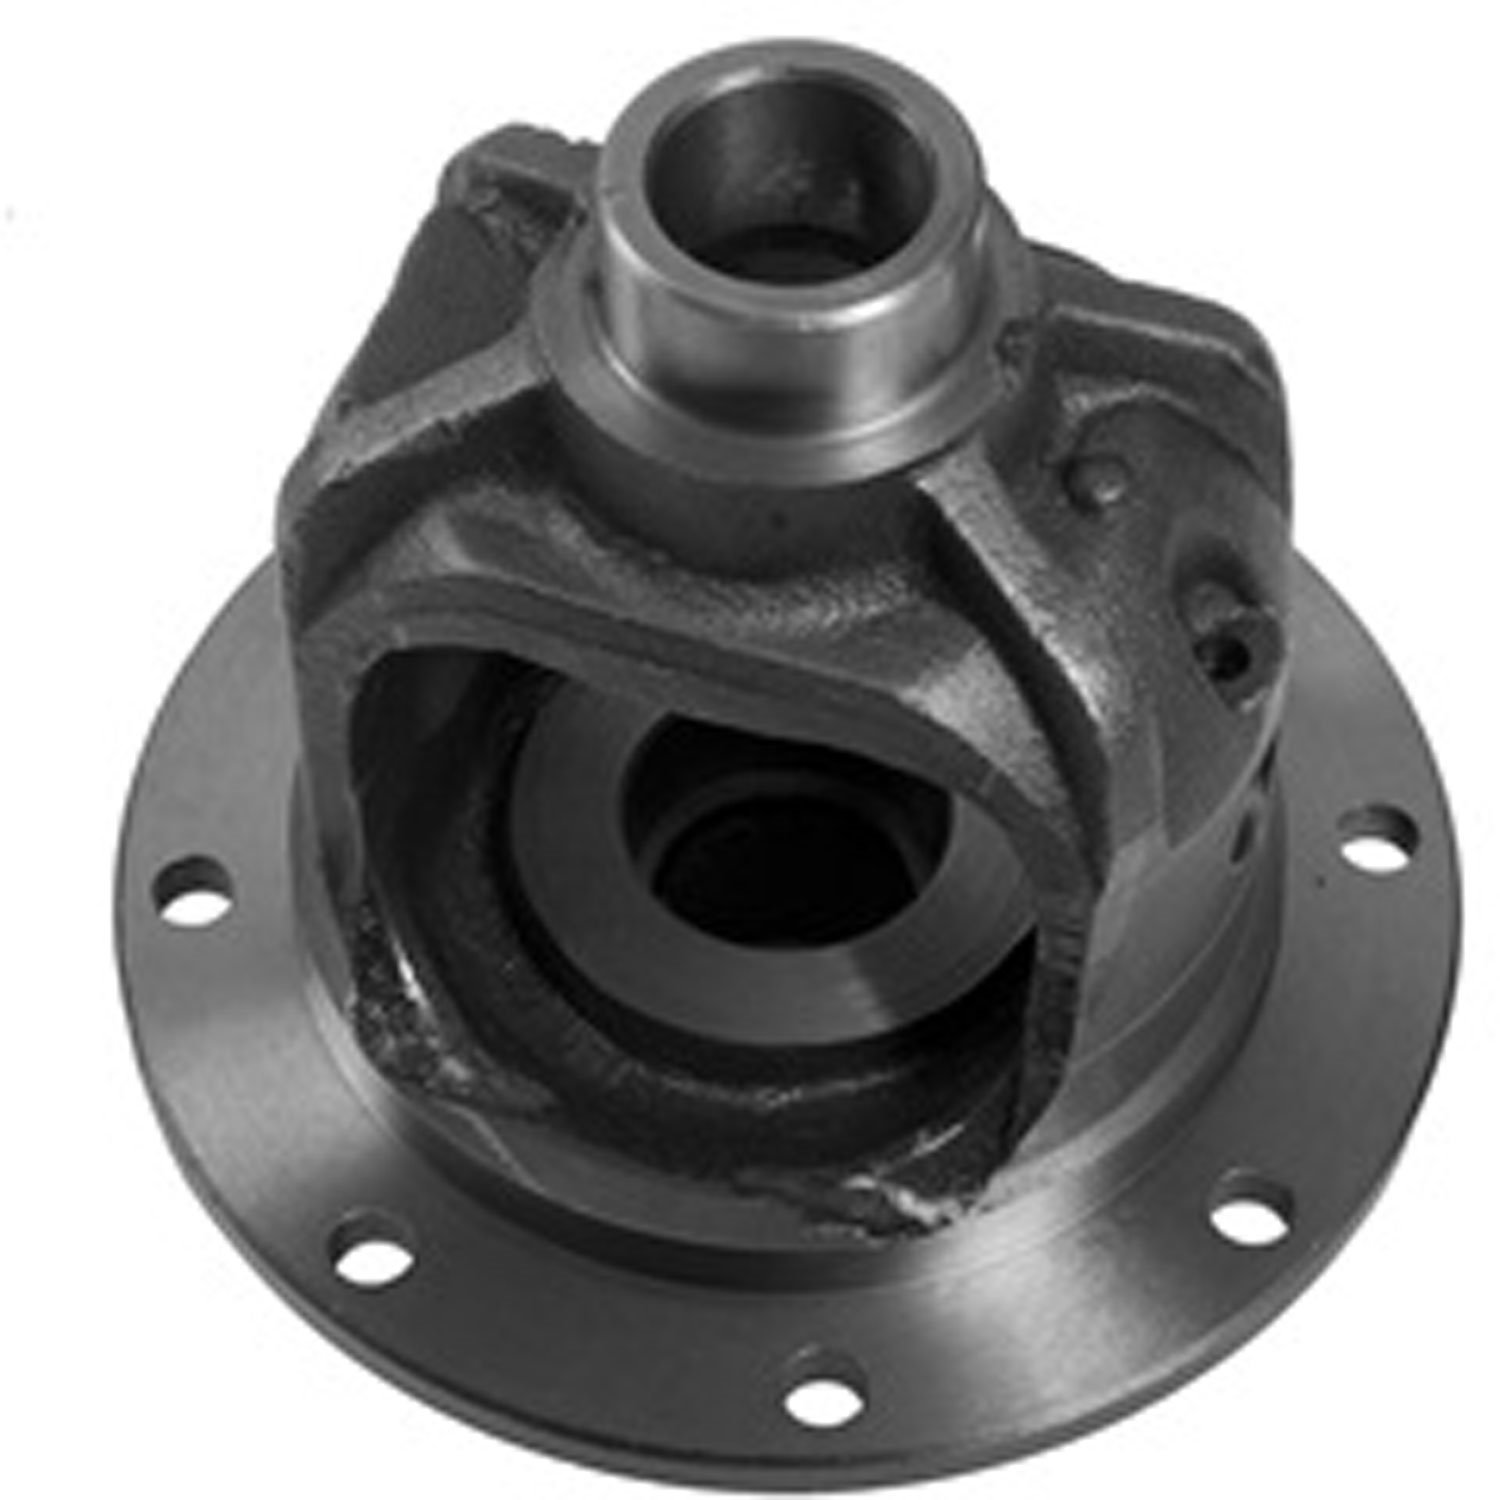 This differential carrier from Omix-ADA fits 76-83 Jeep CJ5 76-86 Jeep CJ7 81-86 Jeep CJ8 with an AMC 20 rear axle.